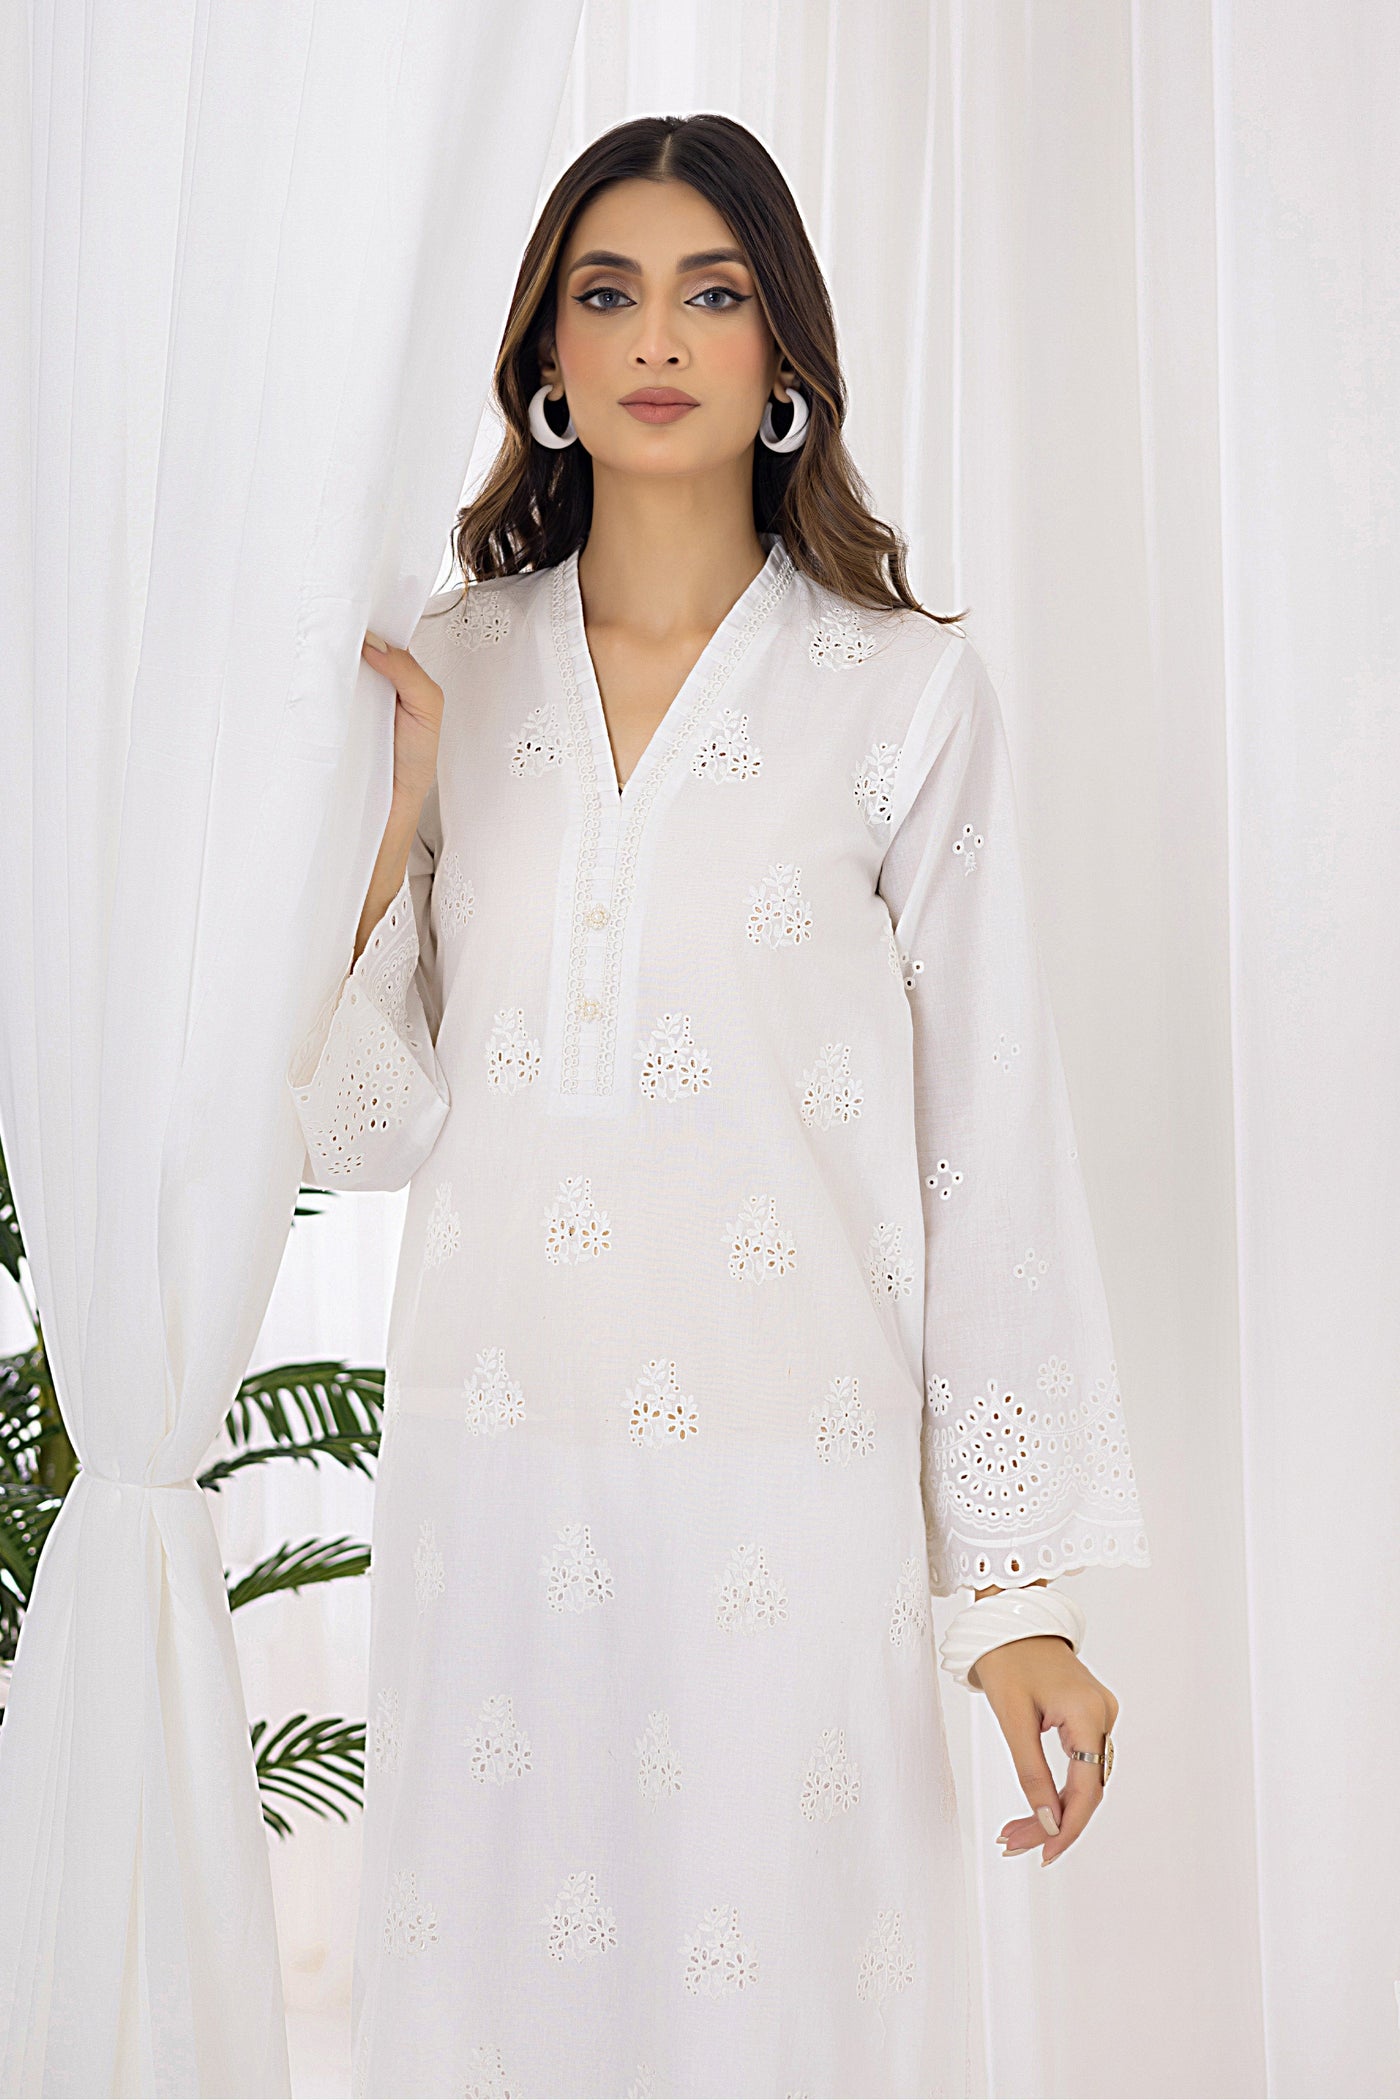 Lakhany 01 Piece Ready to Wear Embroidered Shirt - LG-SR-0129